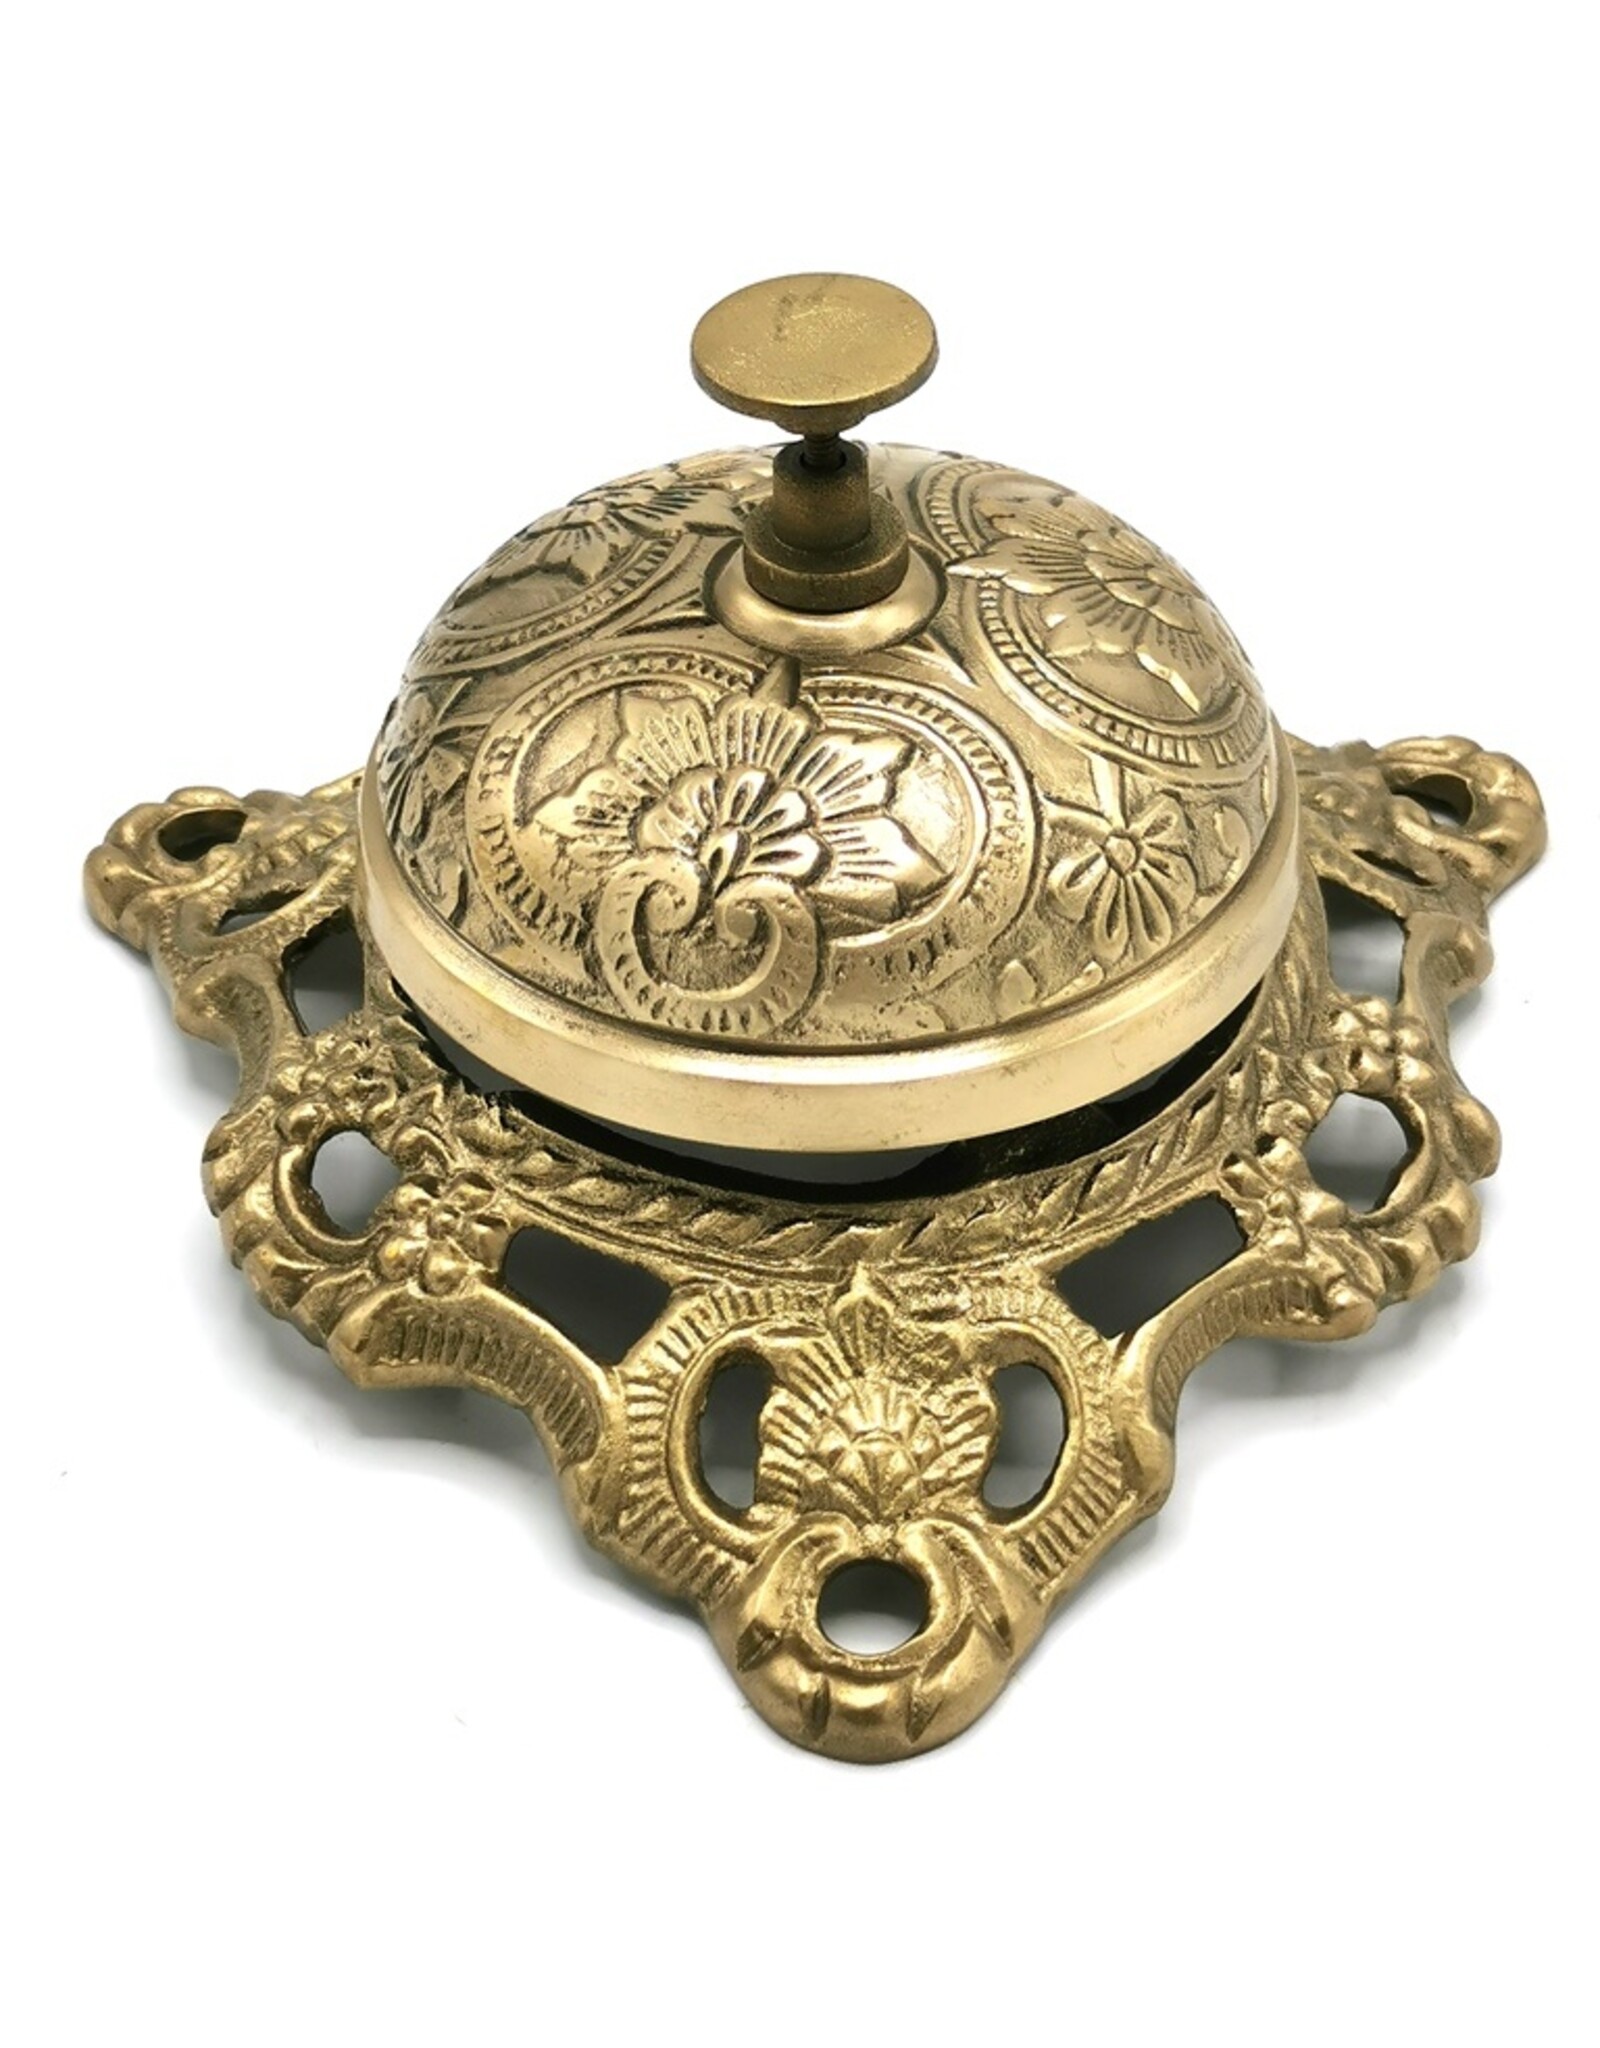 Dutch Style Miscellaneous - Baroque Hotel Bell / Table Bell with Engraved Ornament